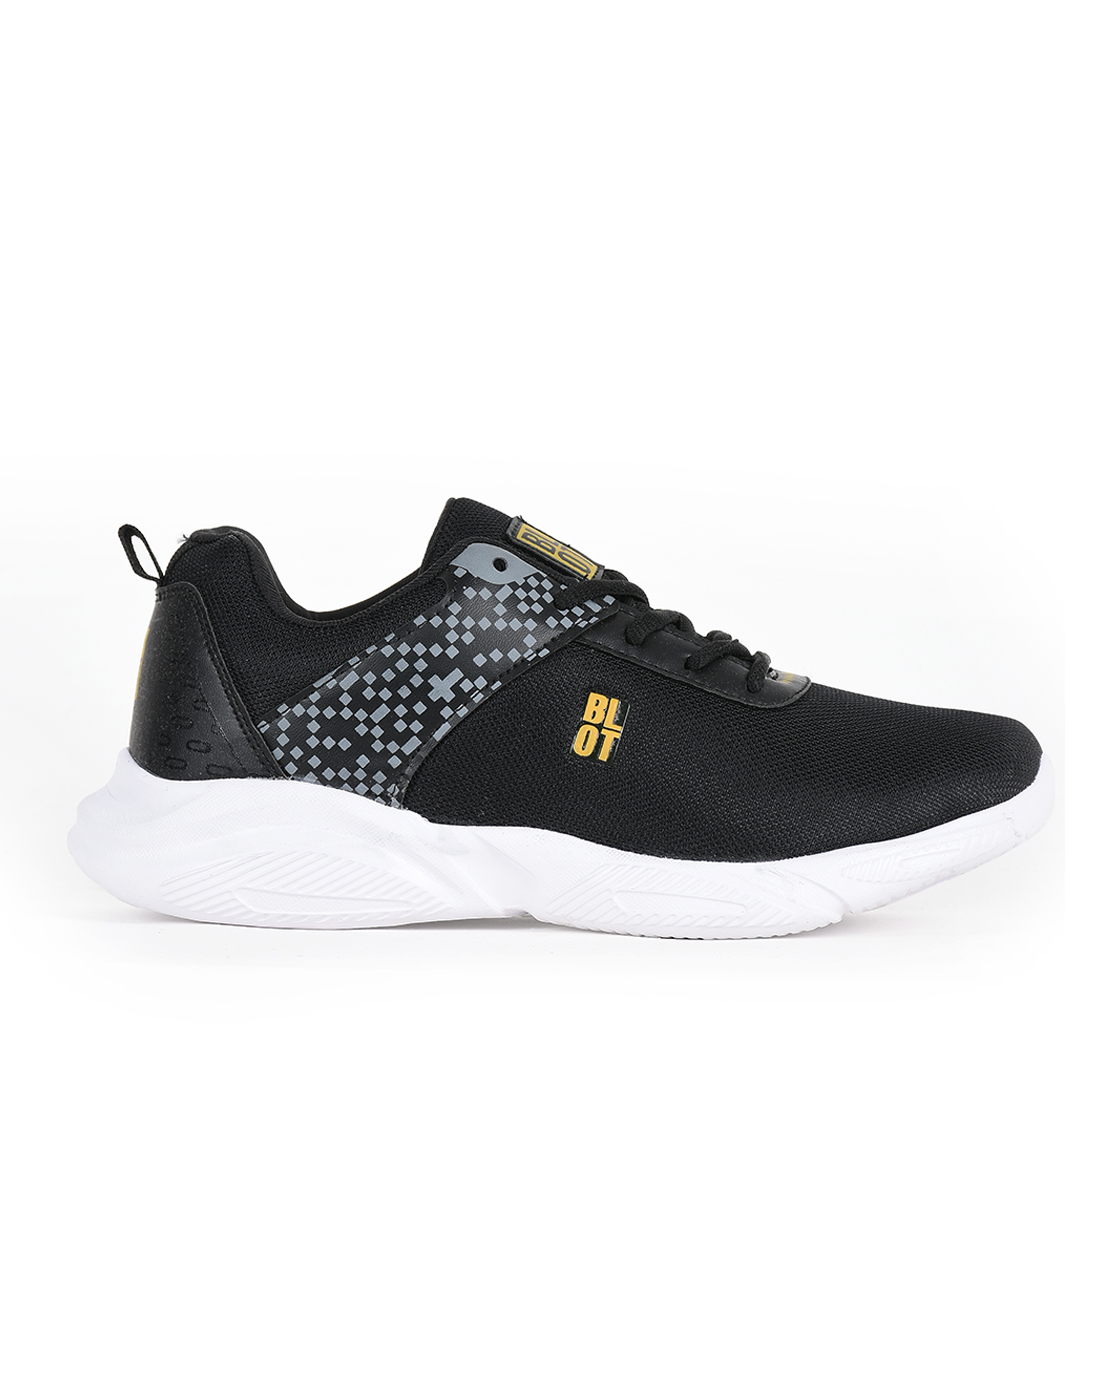 PARAGON Mens Printed Black Sports Sneakers | Stylish, Comfortable and lightweight lace-up Sneakers for Men